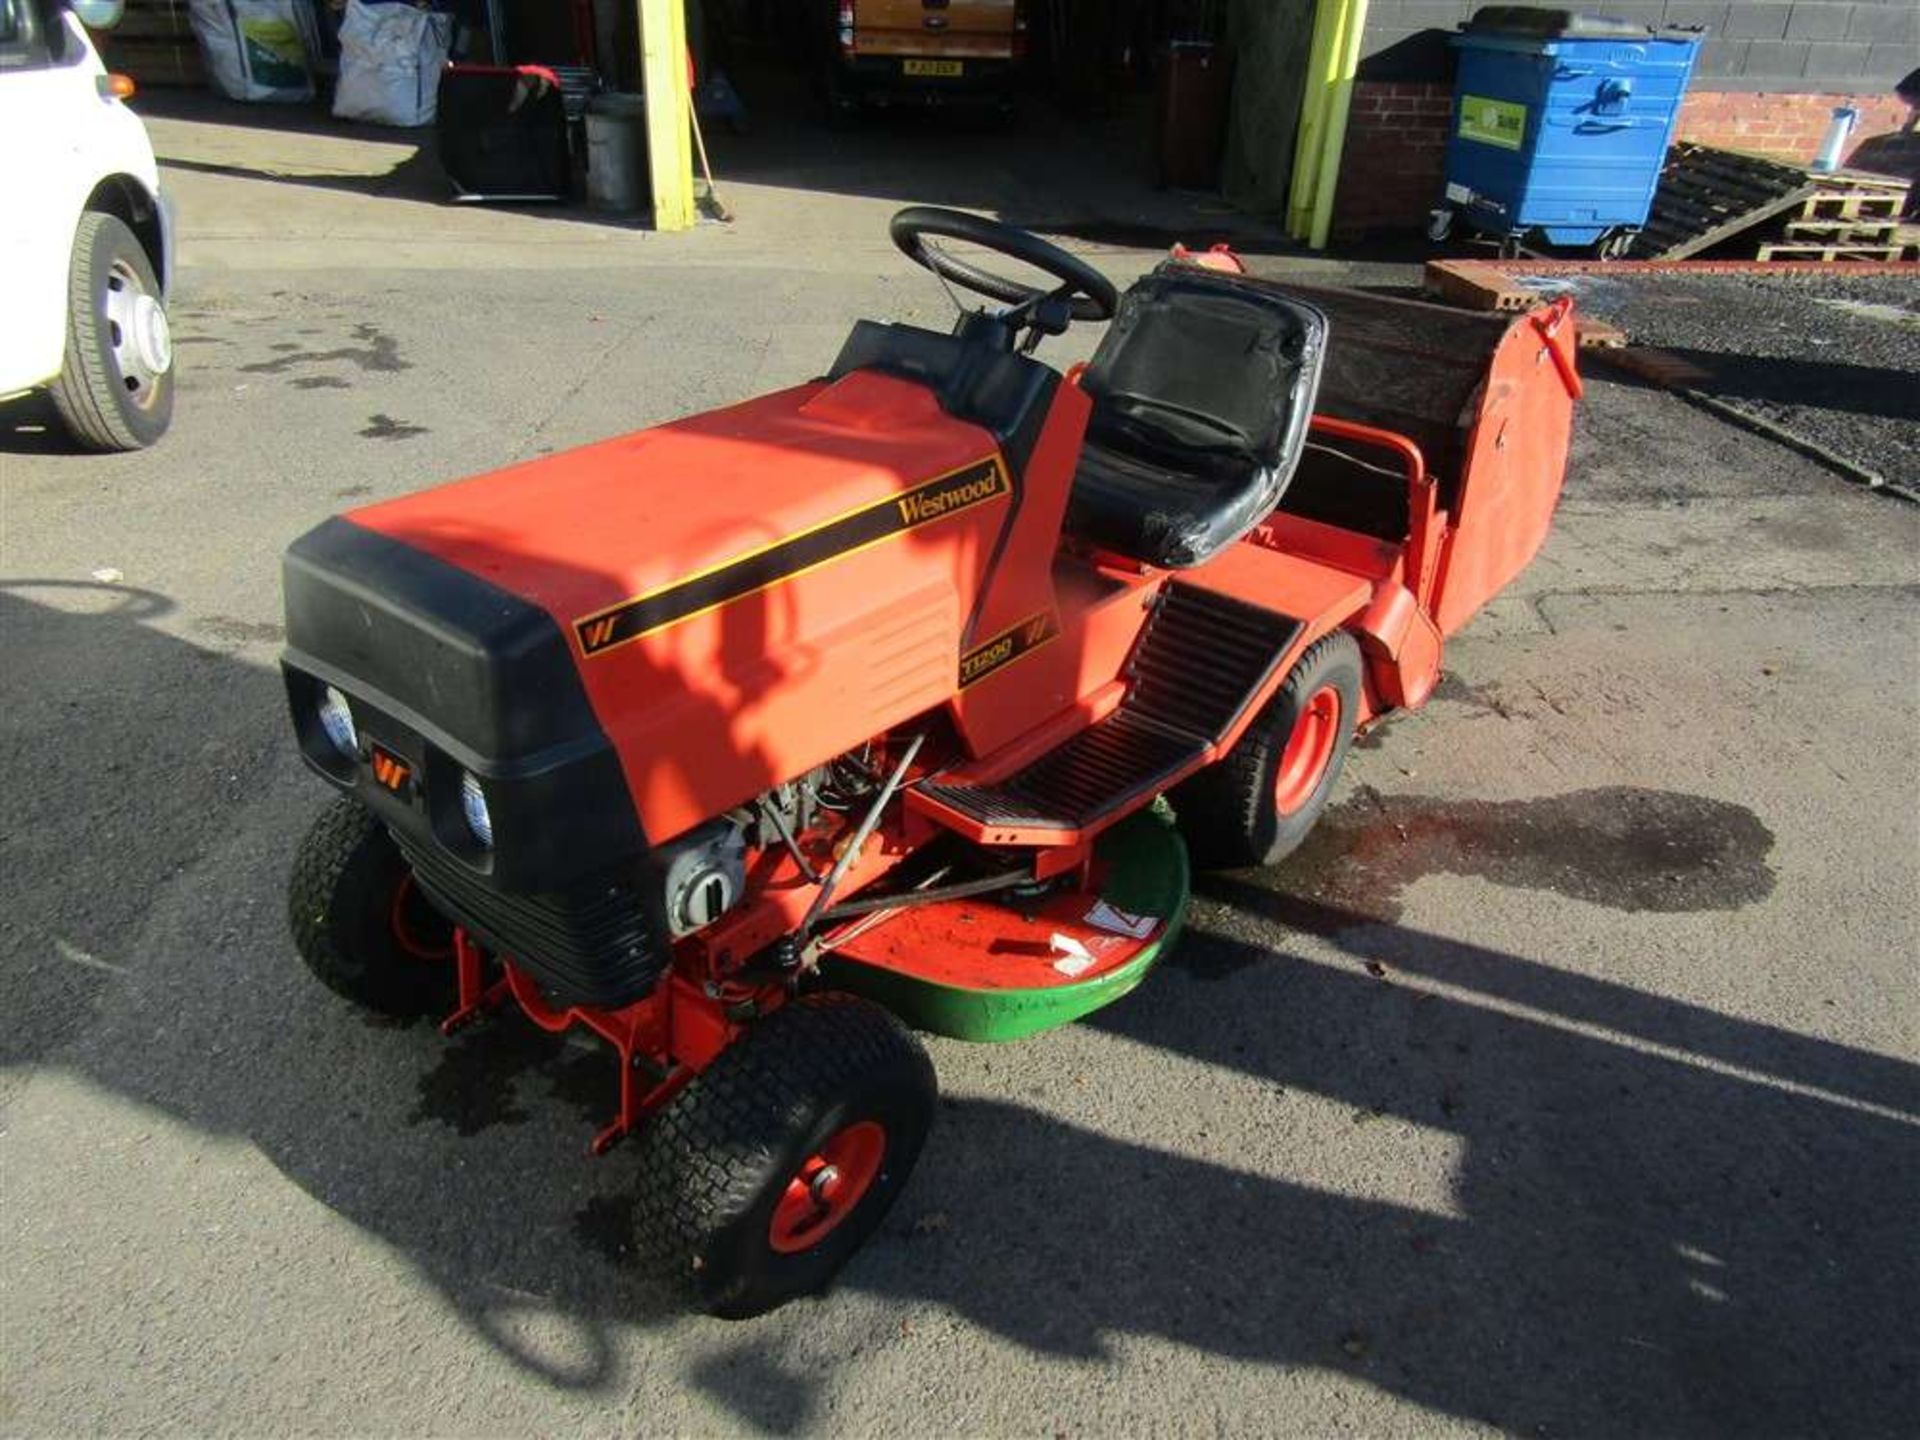 Westwood Petrol Ride on Mower with Brush, Roller & Collector Bucket